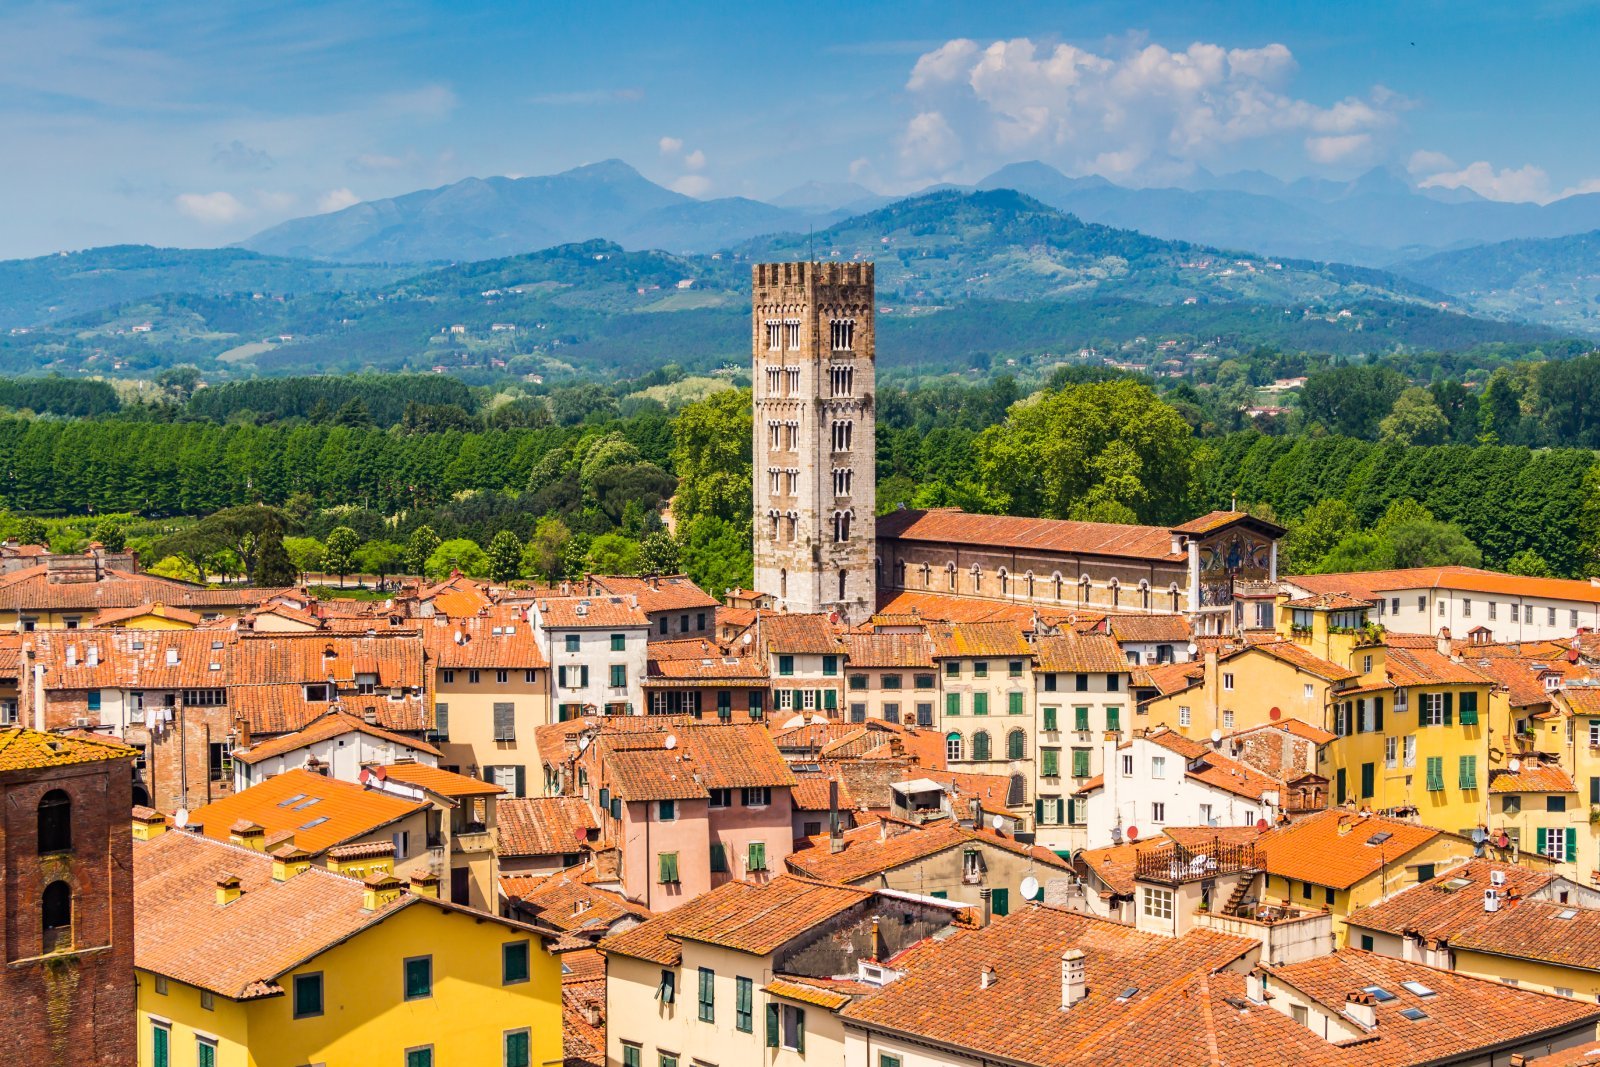 <p class="wp-caption-text">Image Credit: Shutterstock / DaLiu</p>  <p><span>Lucca, in Tuscany, is a graceful city enclosed by well-preserved Renaissance walls, which have been transformed into walking and cycling paths. The city is known for its historic architecture, beautiful piazzas, and vibrant cultural scene. Highlights include the Guinigi Tower, with its rooftop garden, and the Piazza dell’Anfiteatro, built on the ruins of a Roman amphitheater.</span></p>